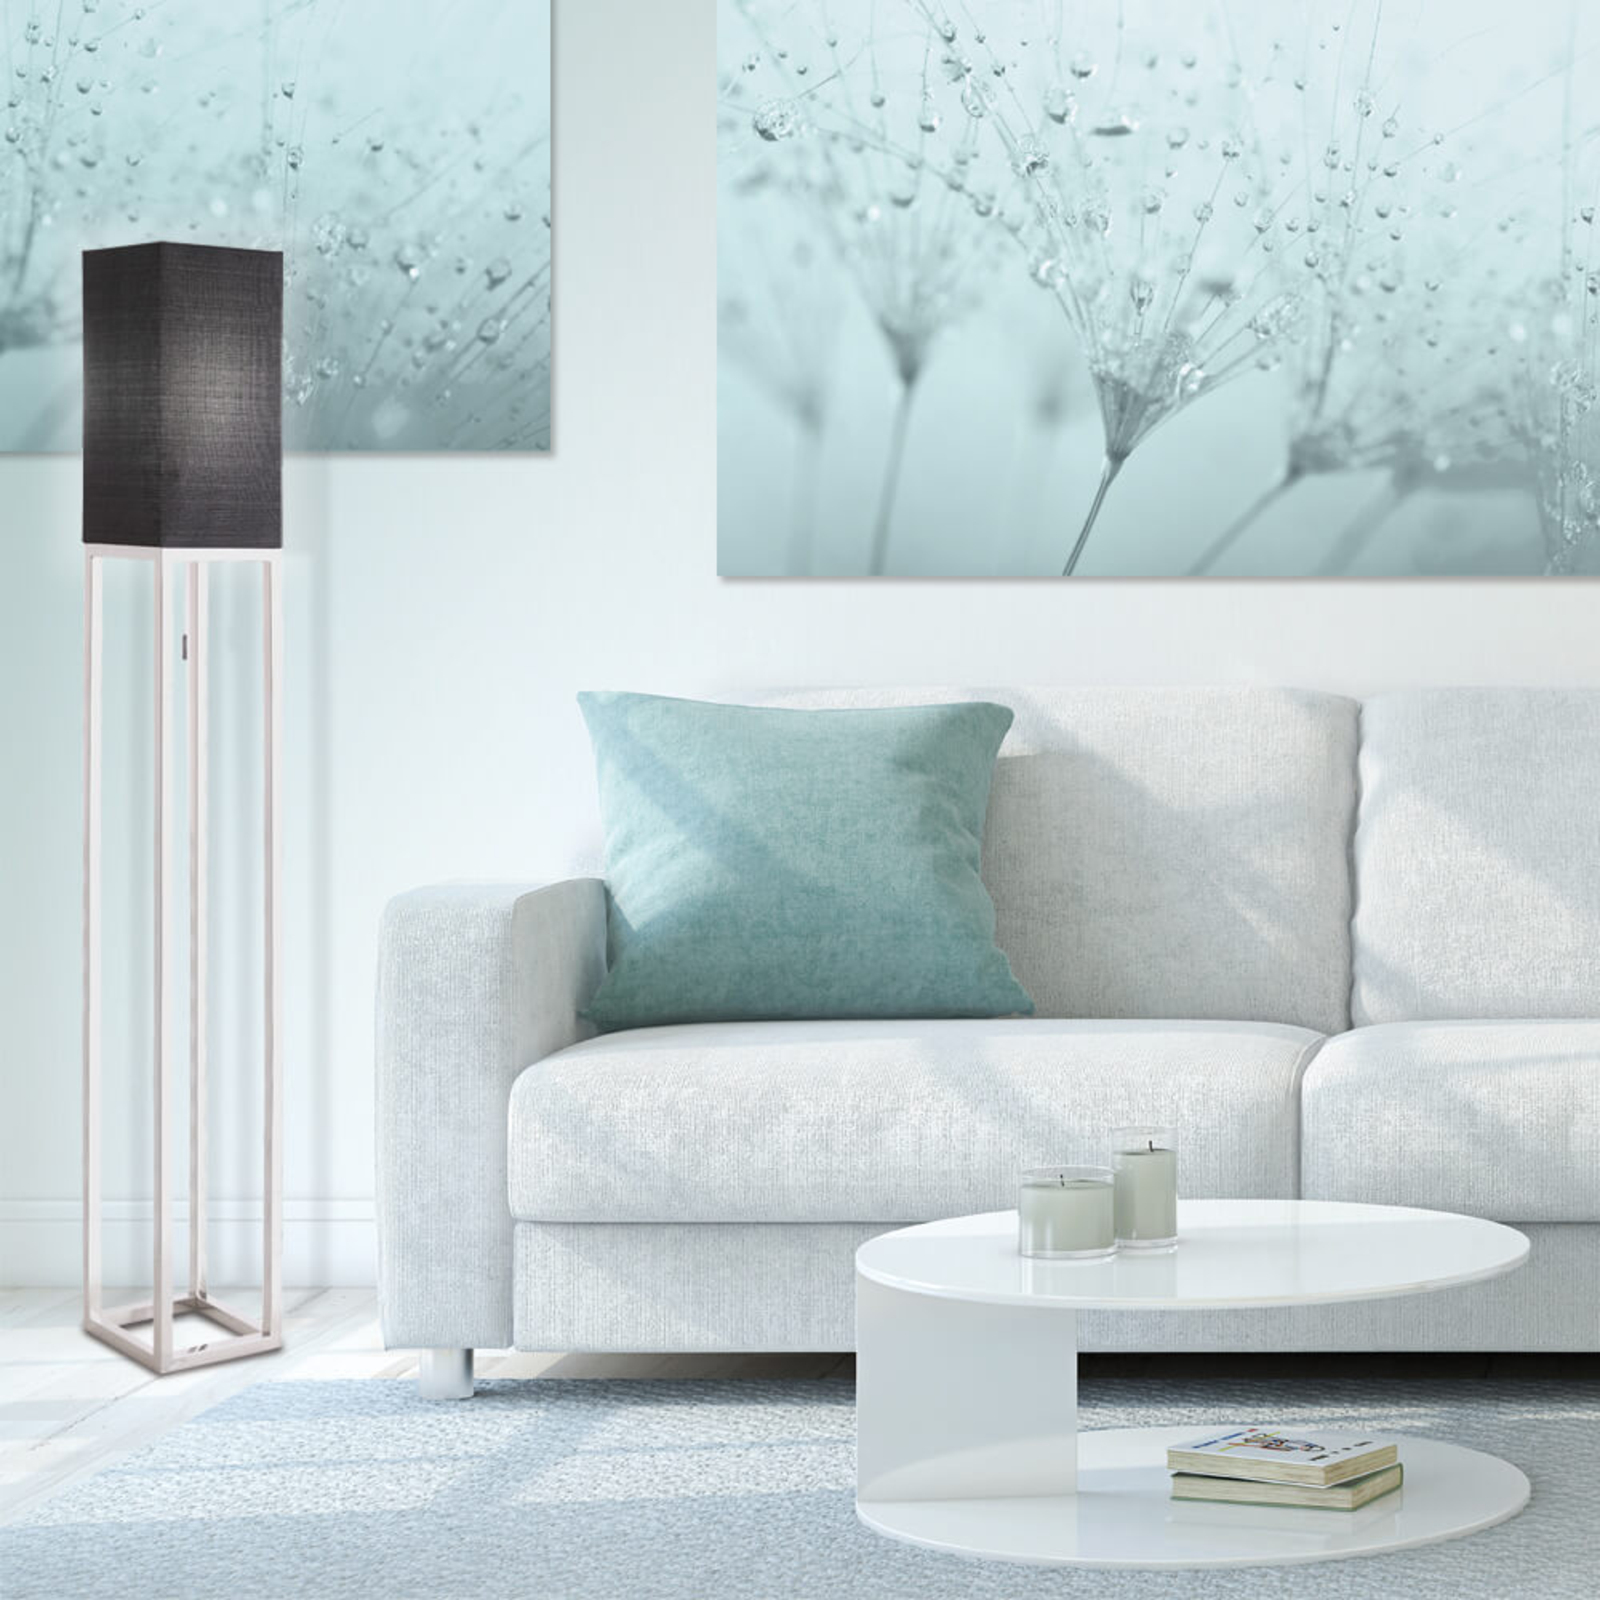 With pull switch - Mira fabric floor lamp